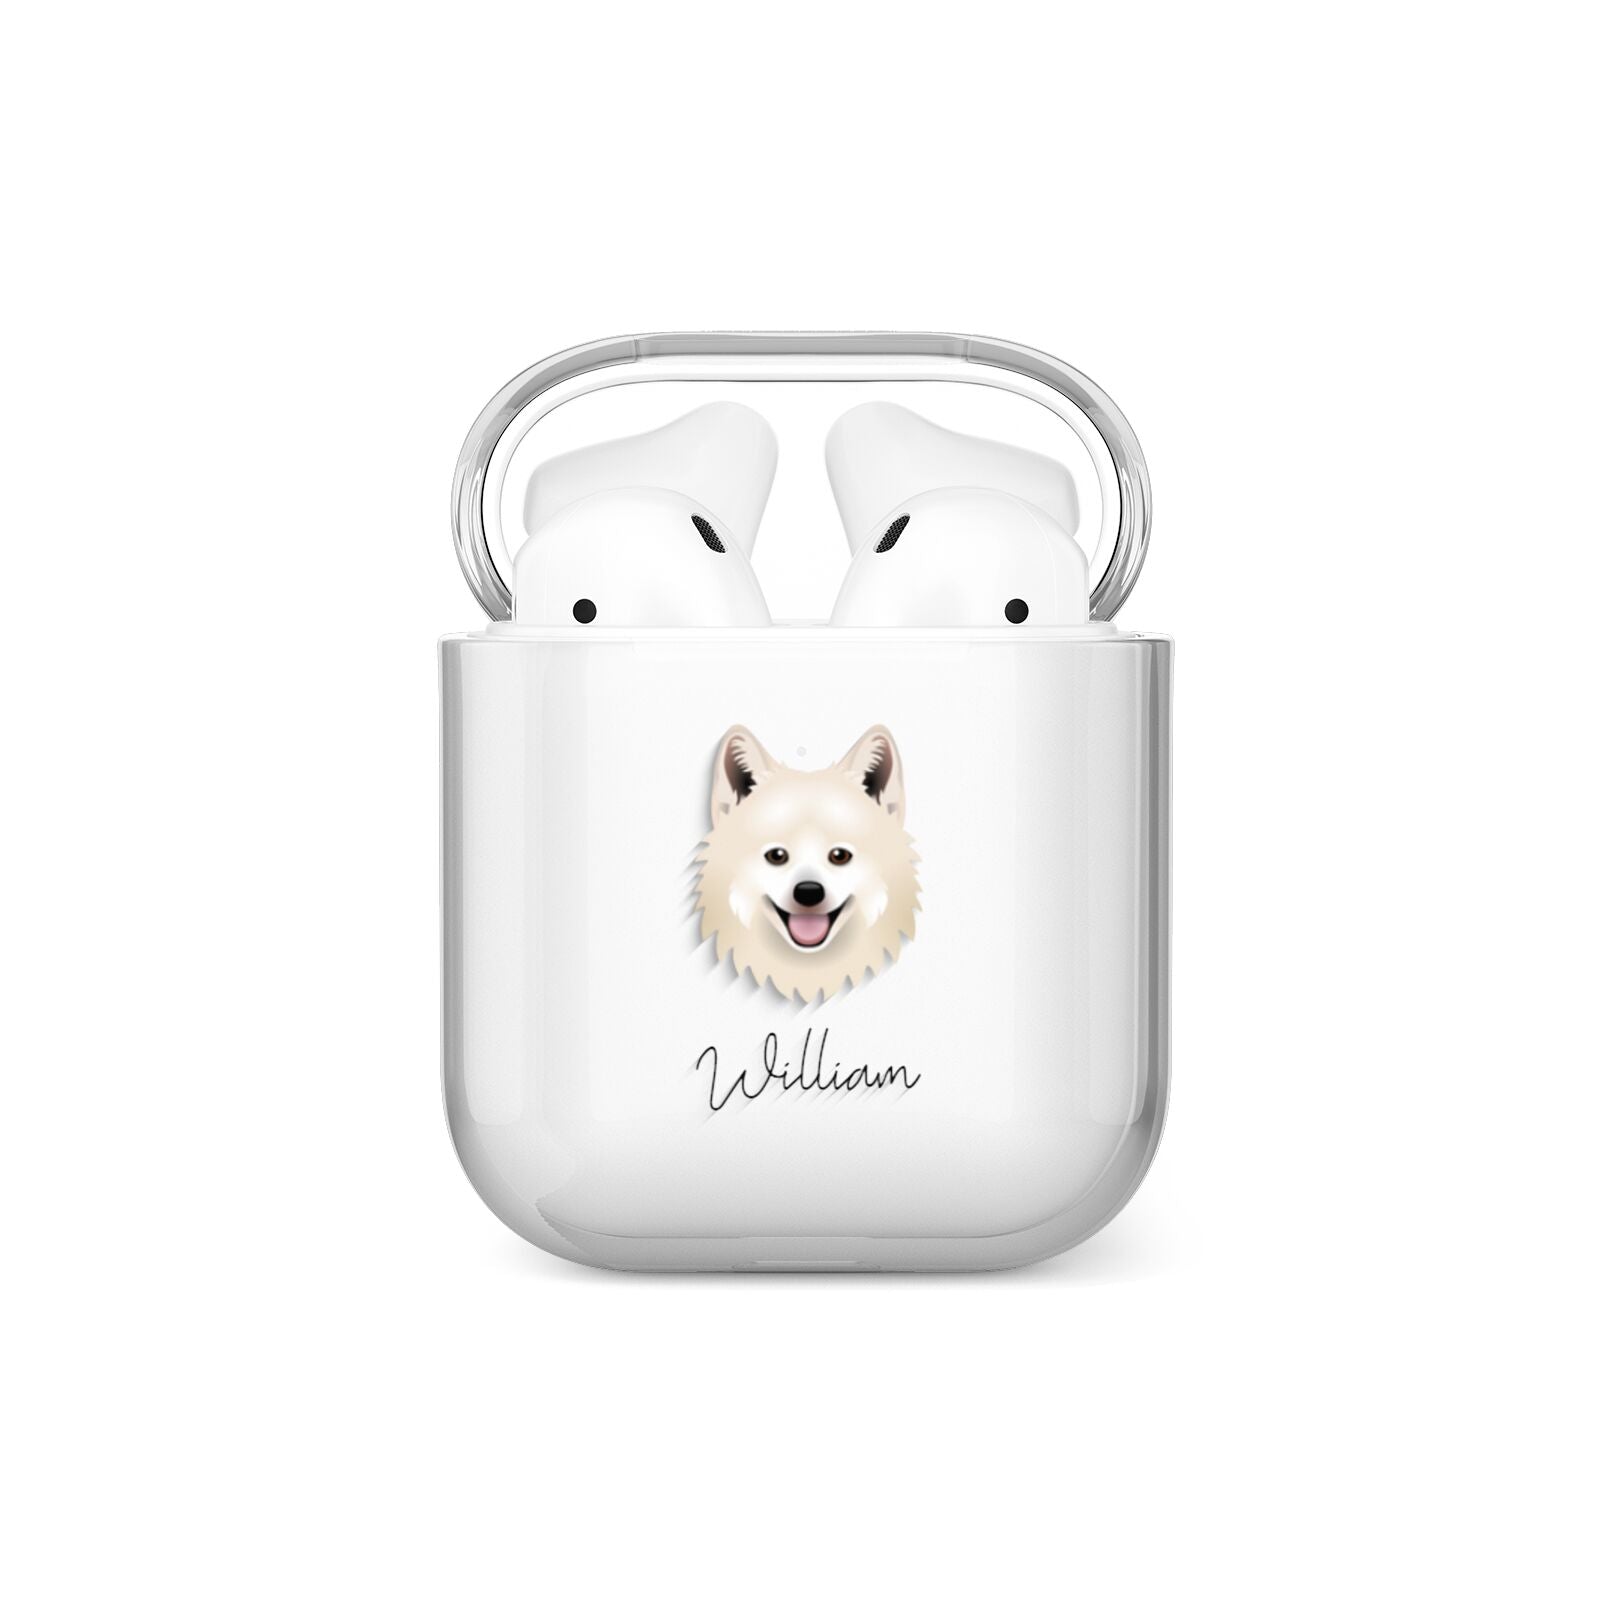 Japanese Spitz Personalised AirPods Case